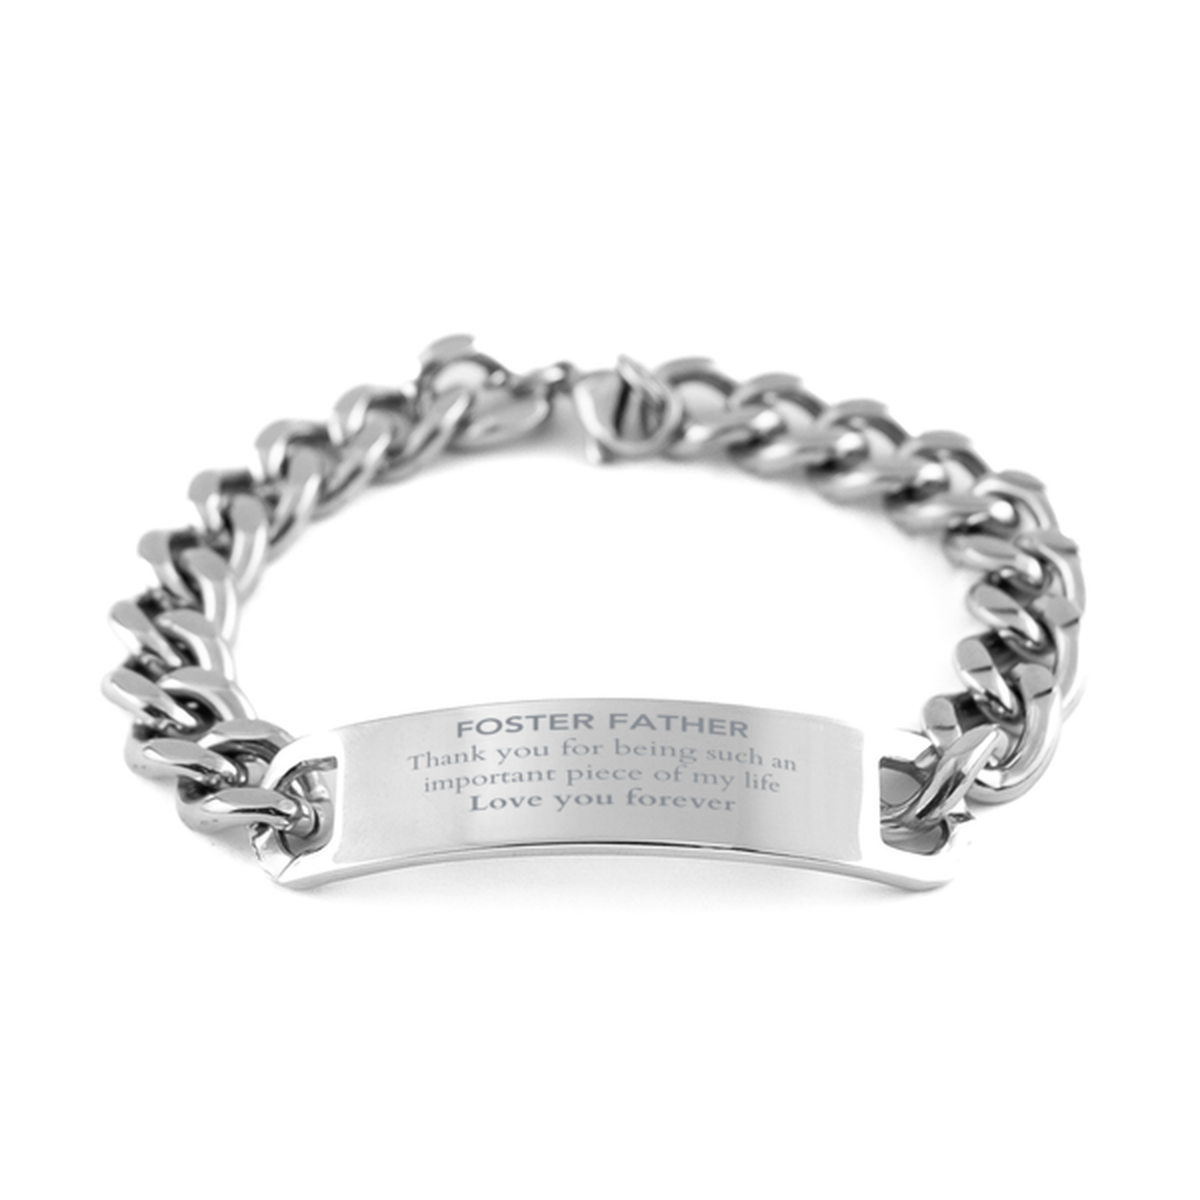 Appropriate Foster Father Cuban Chain Stainless Steel Bracelet Epic Birthday Gifts for Foster Father Thank you for being such an important piece of my life Foster Father Christmas Mothers Fathers Day